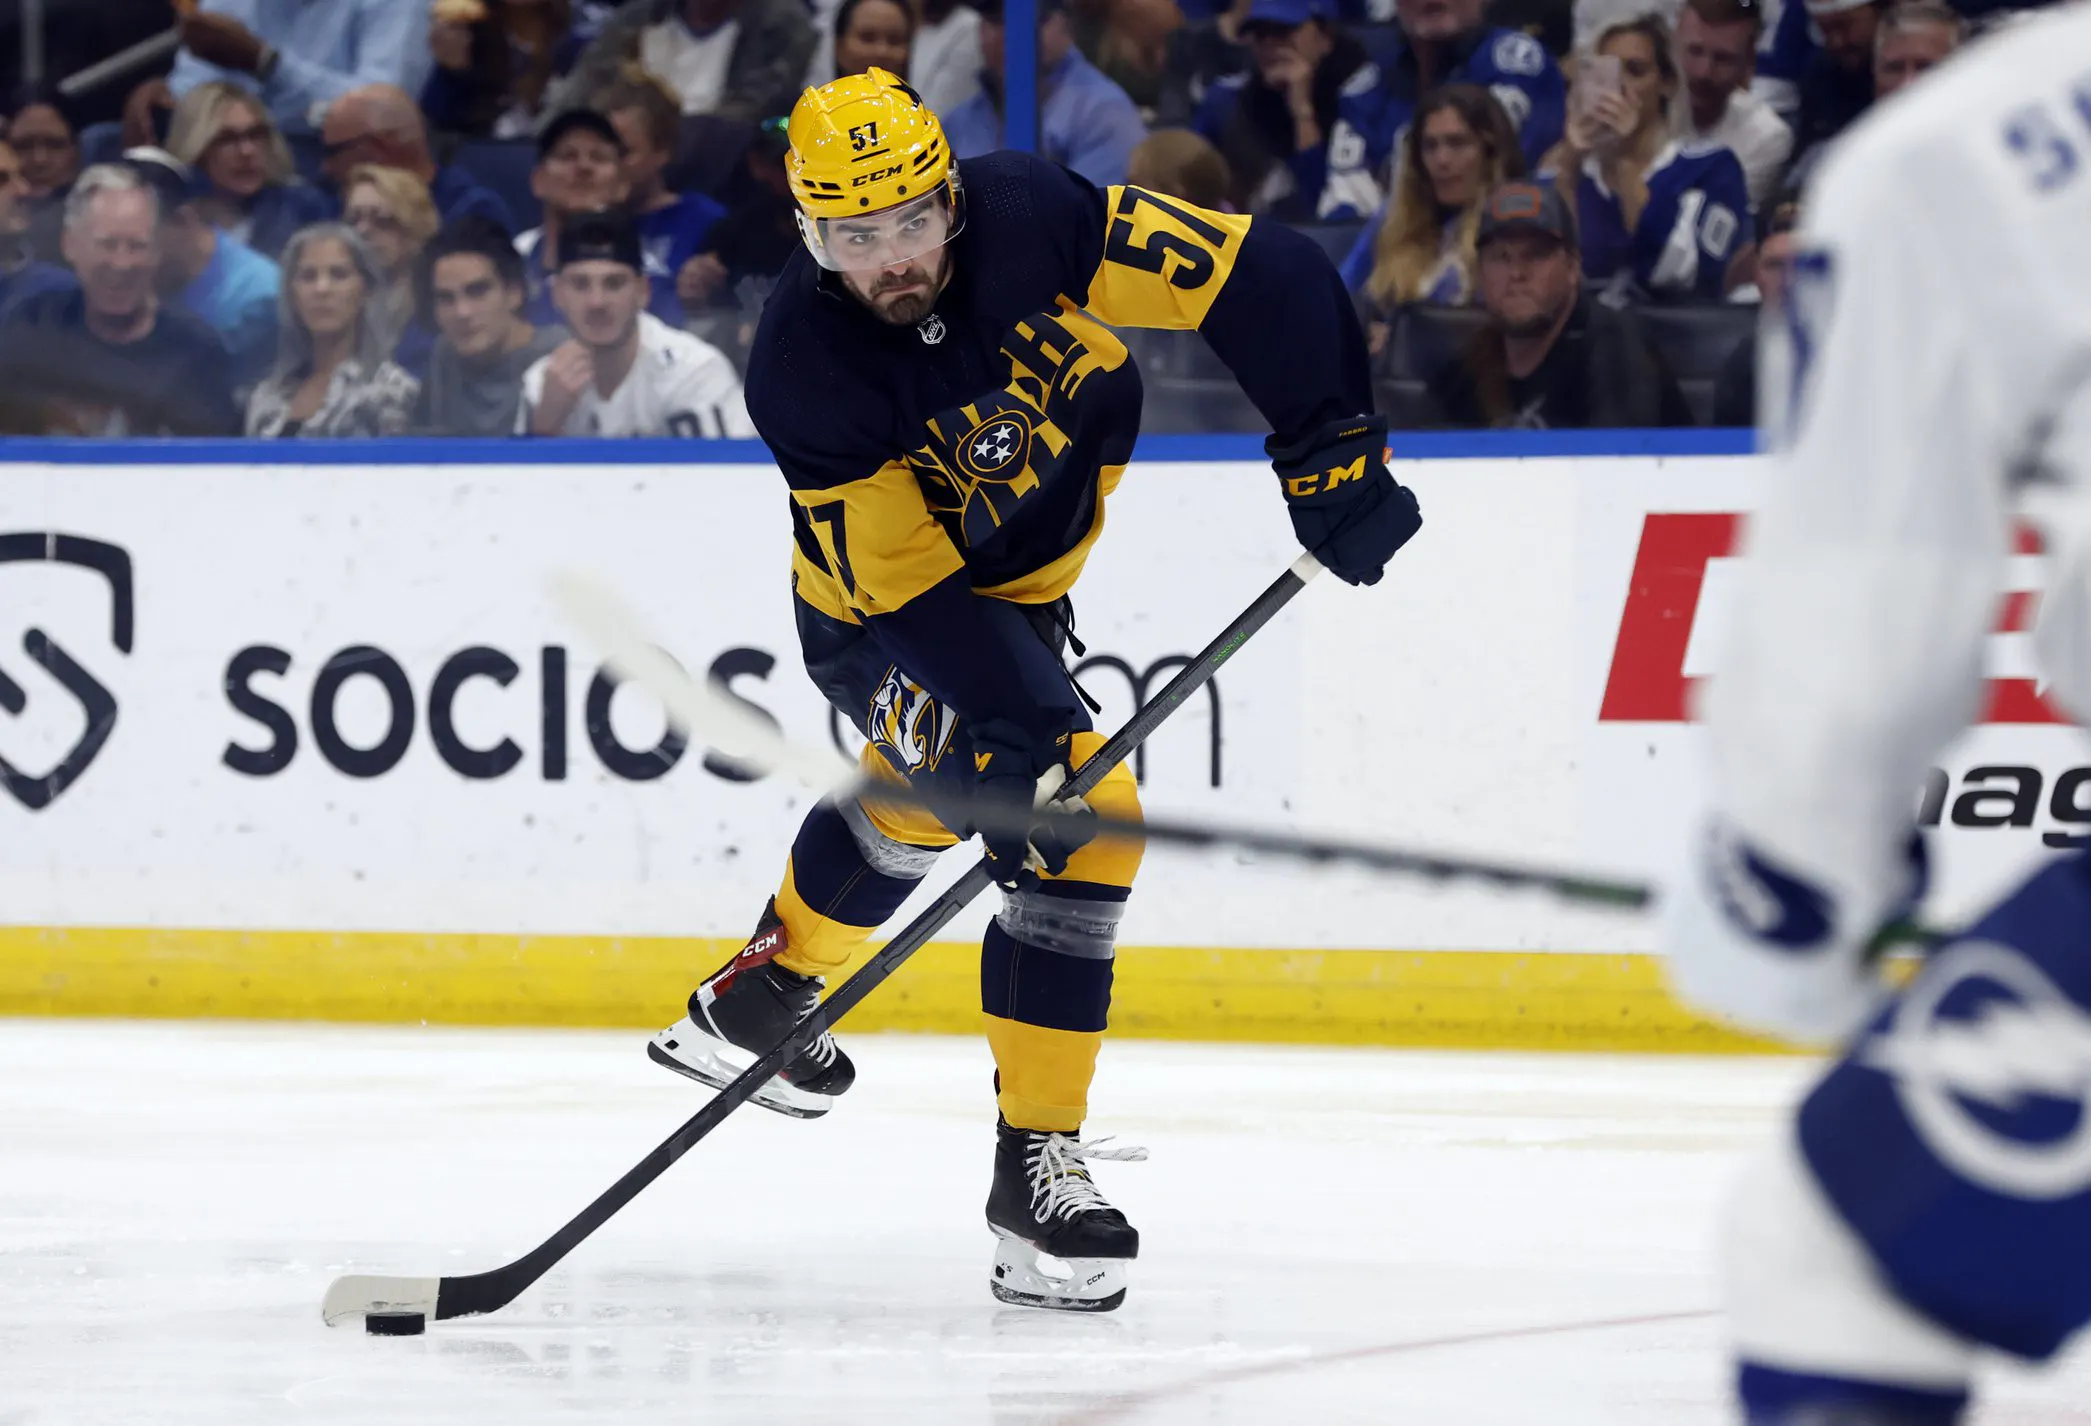 The Nashville Predators have signed Dante Fabbro to a one-year contract extension